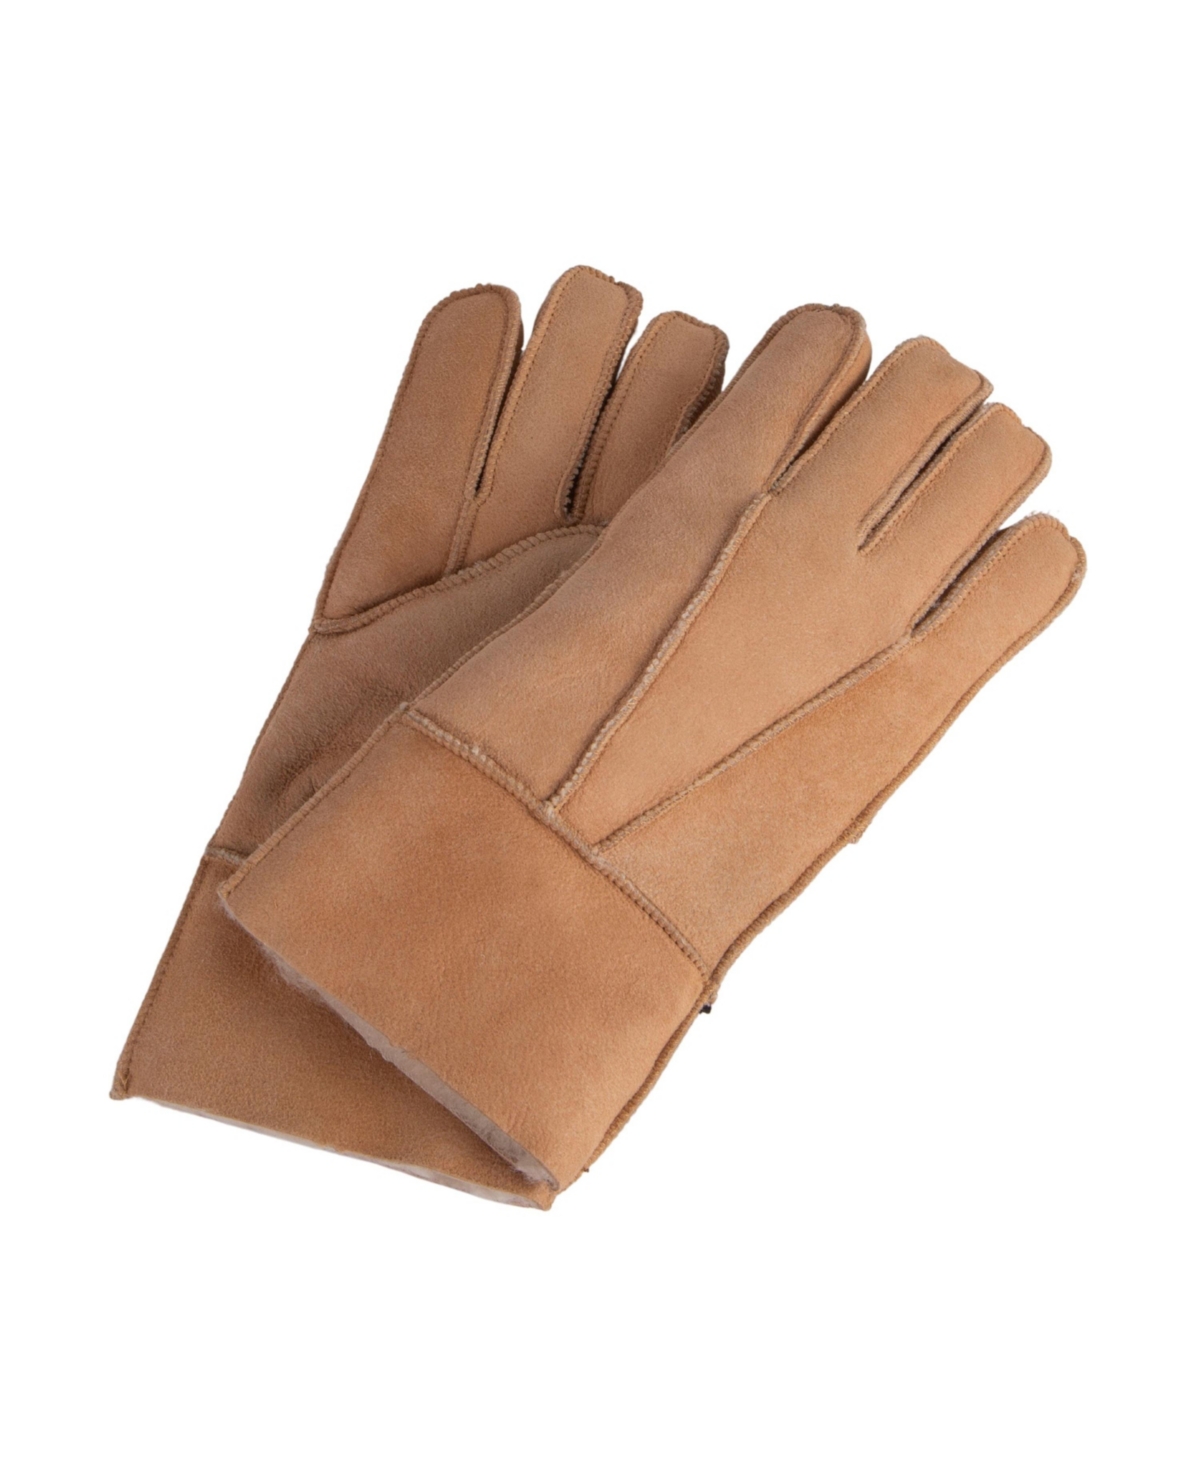 Men's Warm Leather Gloves - Chocolate